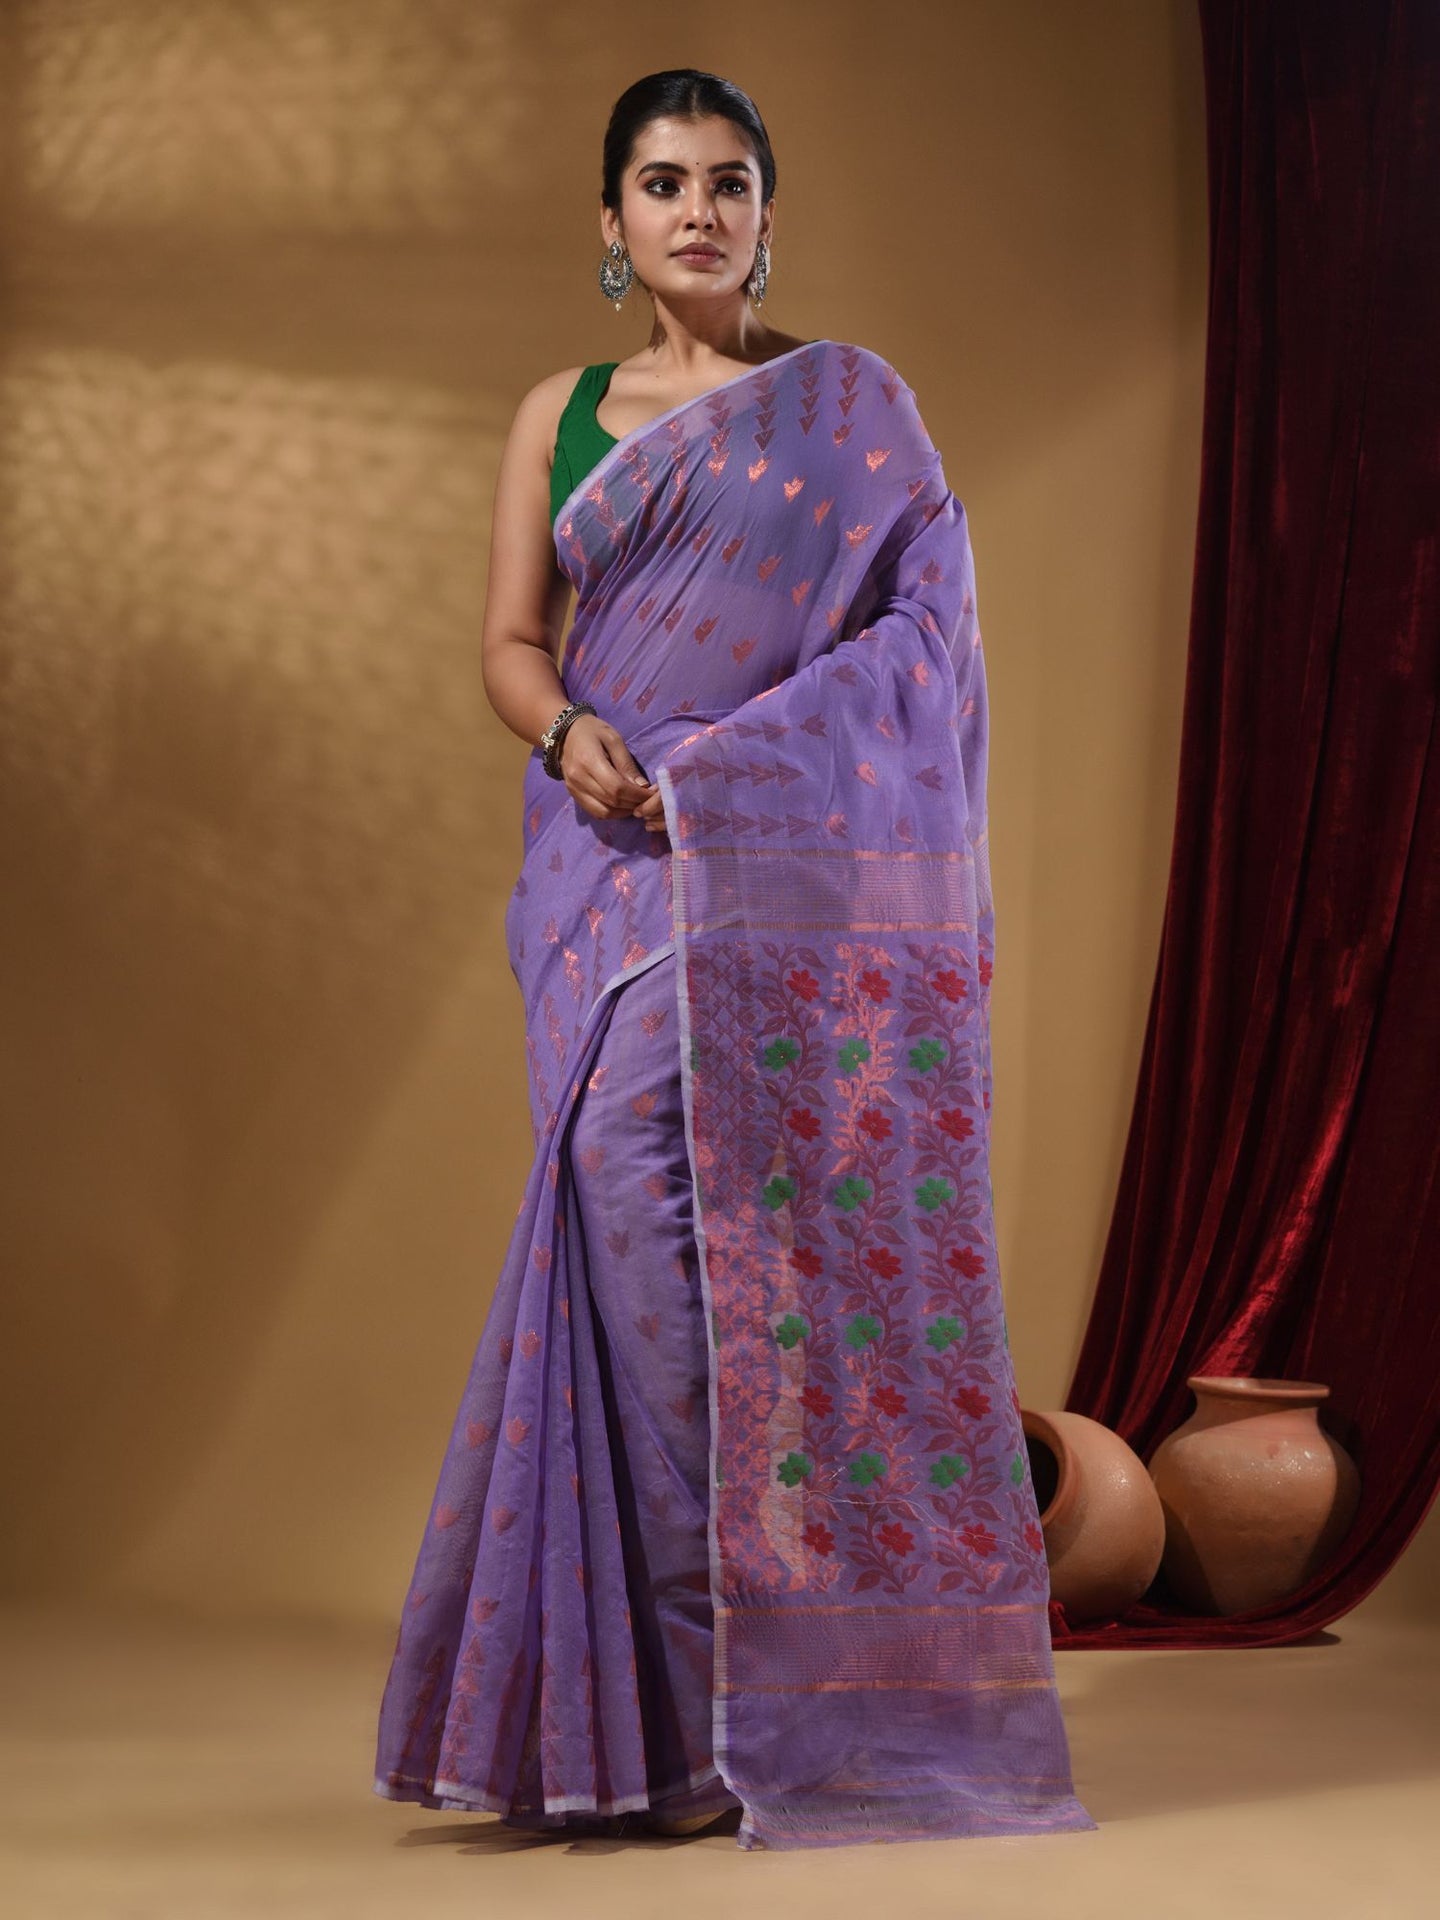 Periwinkle Cotton Handwoven Jamdani Saree With Geometric Designs and Floral Patterns